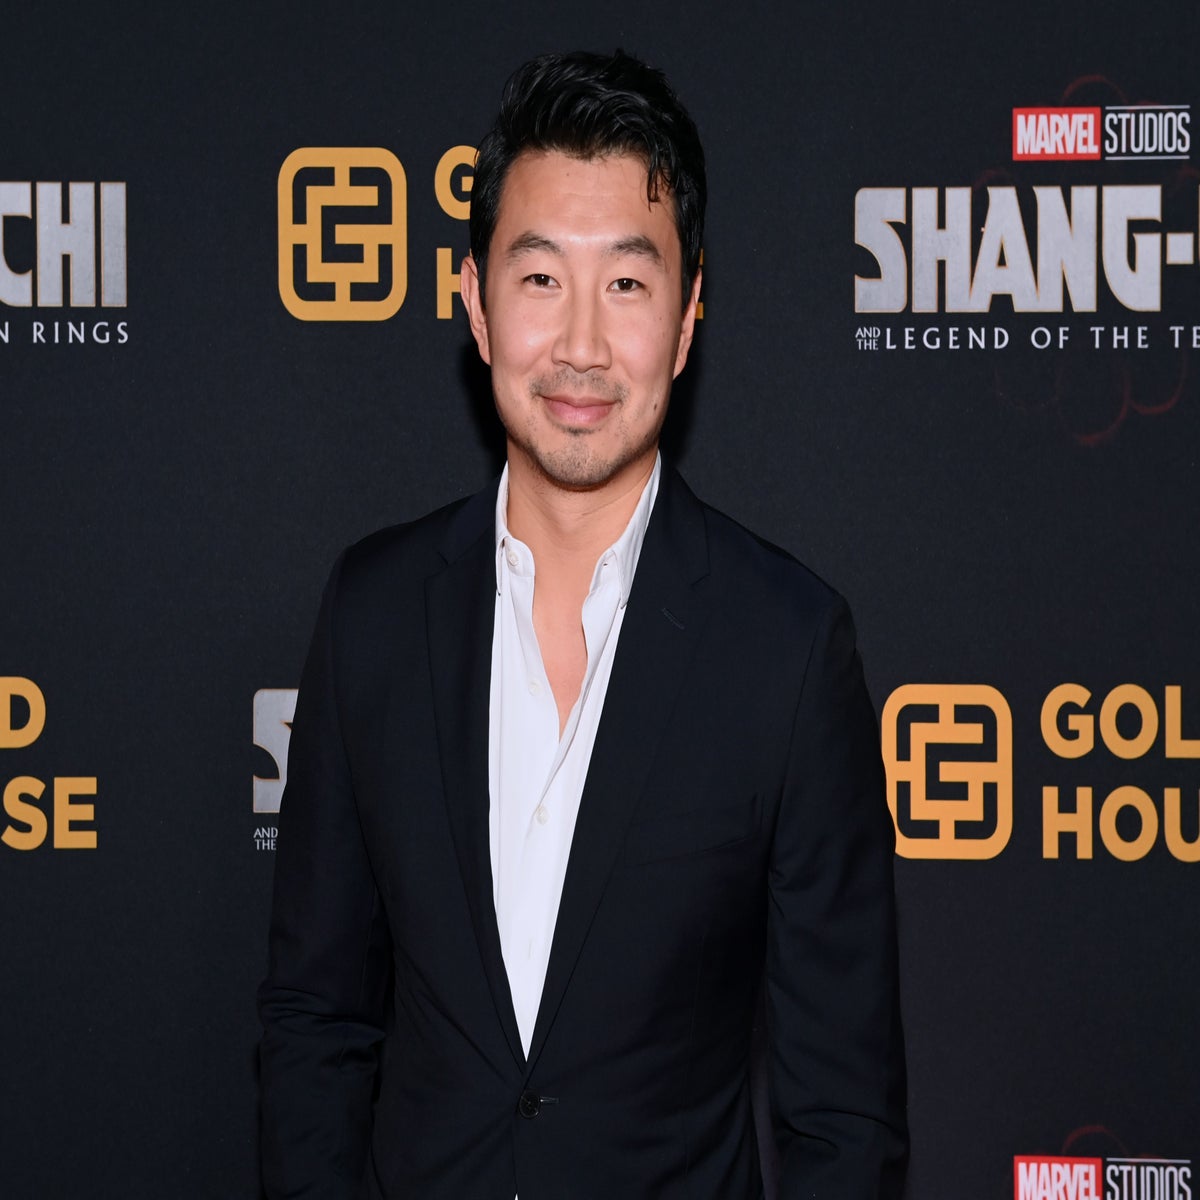 Who Is Simu Liu? 5 Things About The 'Shang-Chi' Actor & 'SNL' Host